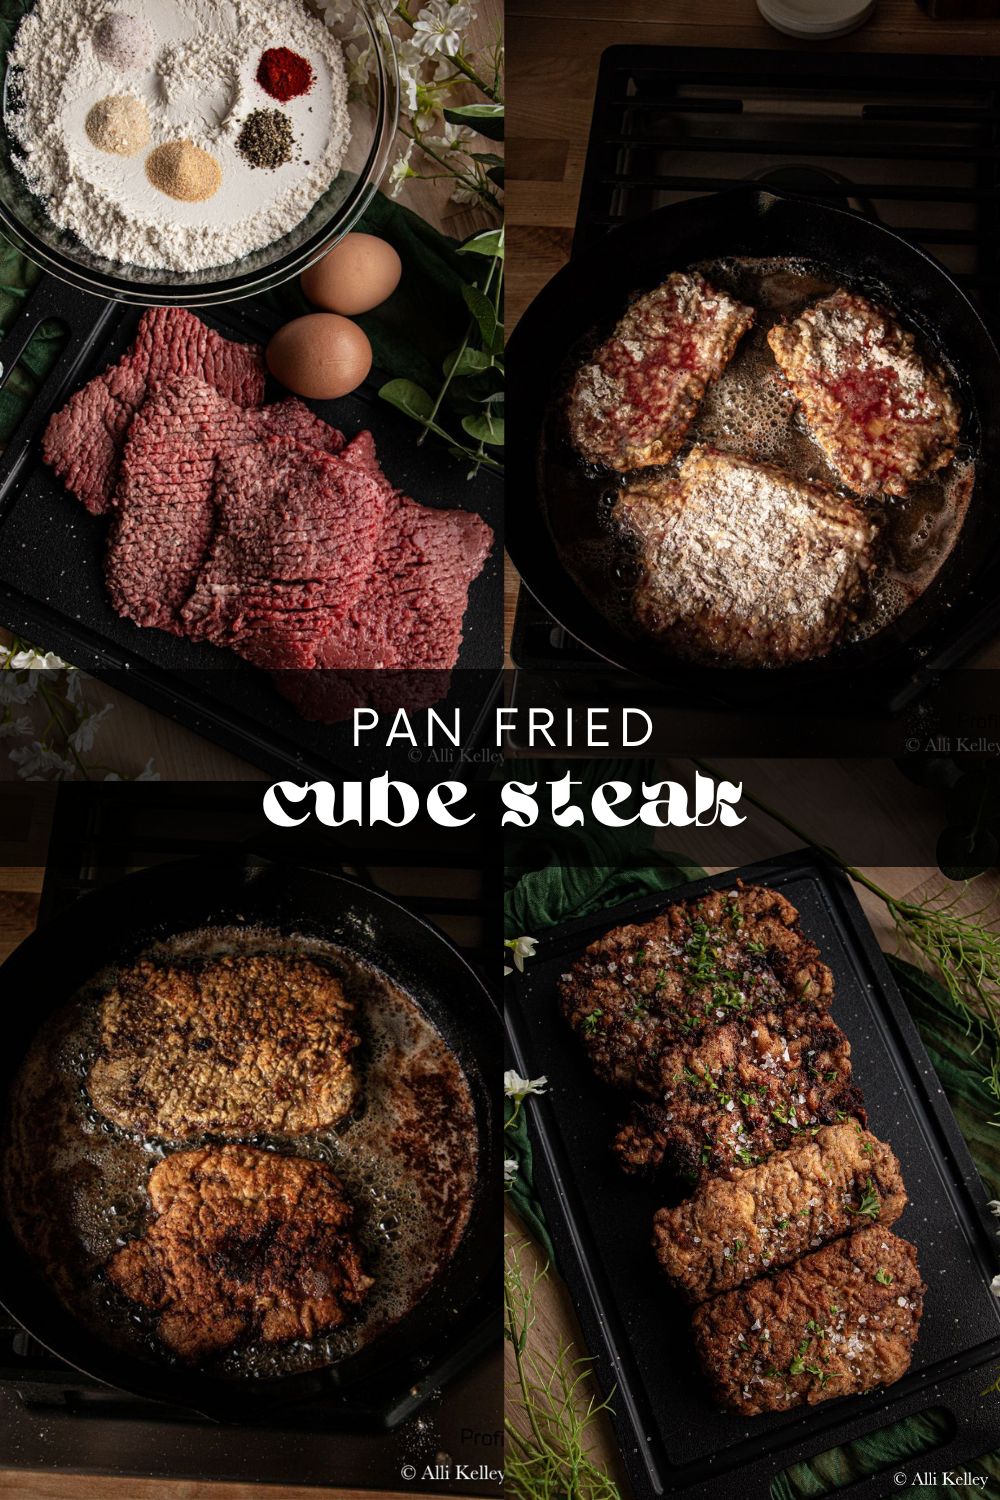 This cube steak recipe is the perfect way to elevate your weeknight dinner game. It's easy, delicious, and smothered in a rich onion gravy! Once you know how to cook cube steak, it'll be your new go-to comfort food. Serve it with mashed potatoes, rice, or your favorite vegetables for an oh-so-satisfying meal!